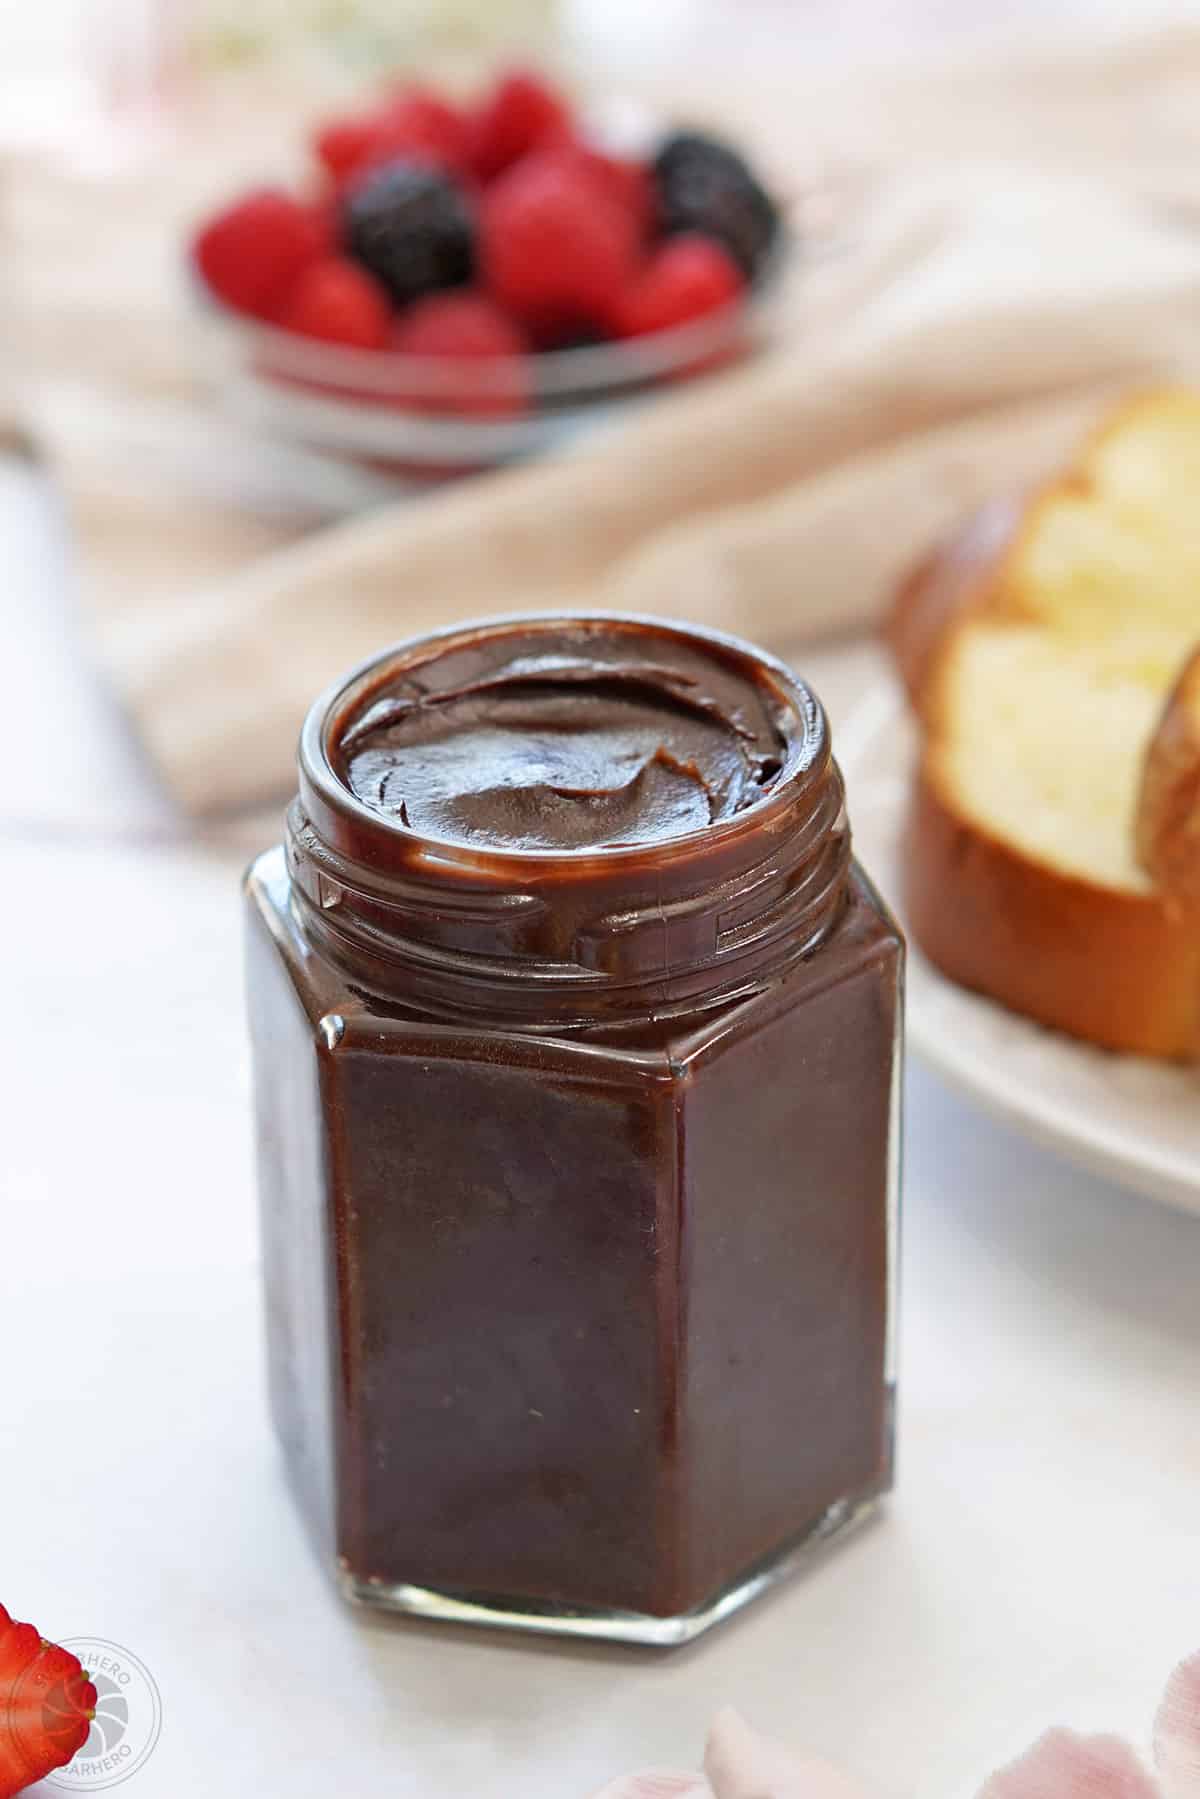 A glass jar of Chocolate Spread next to fruit and bread.